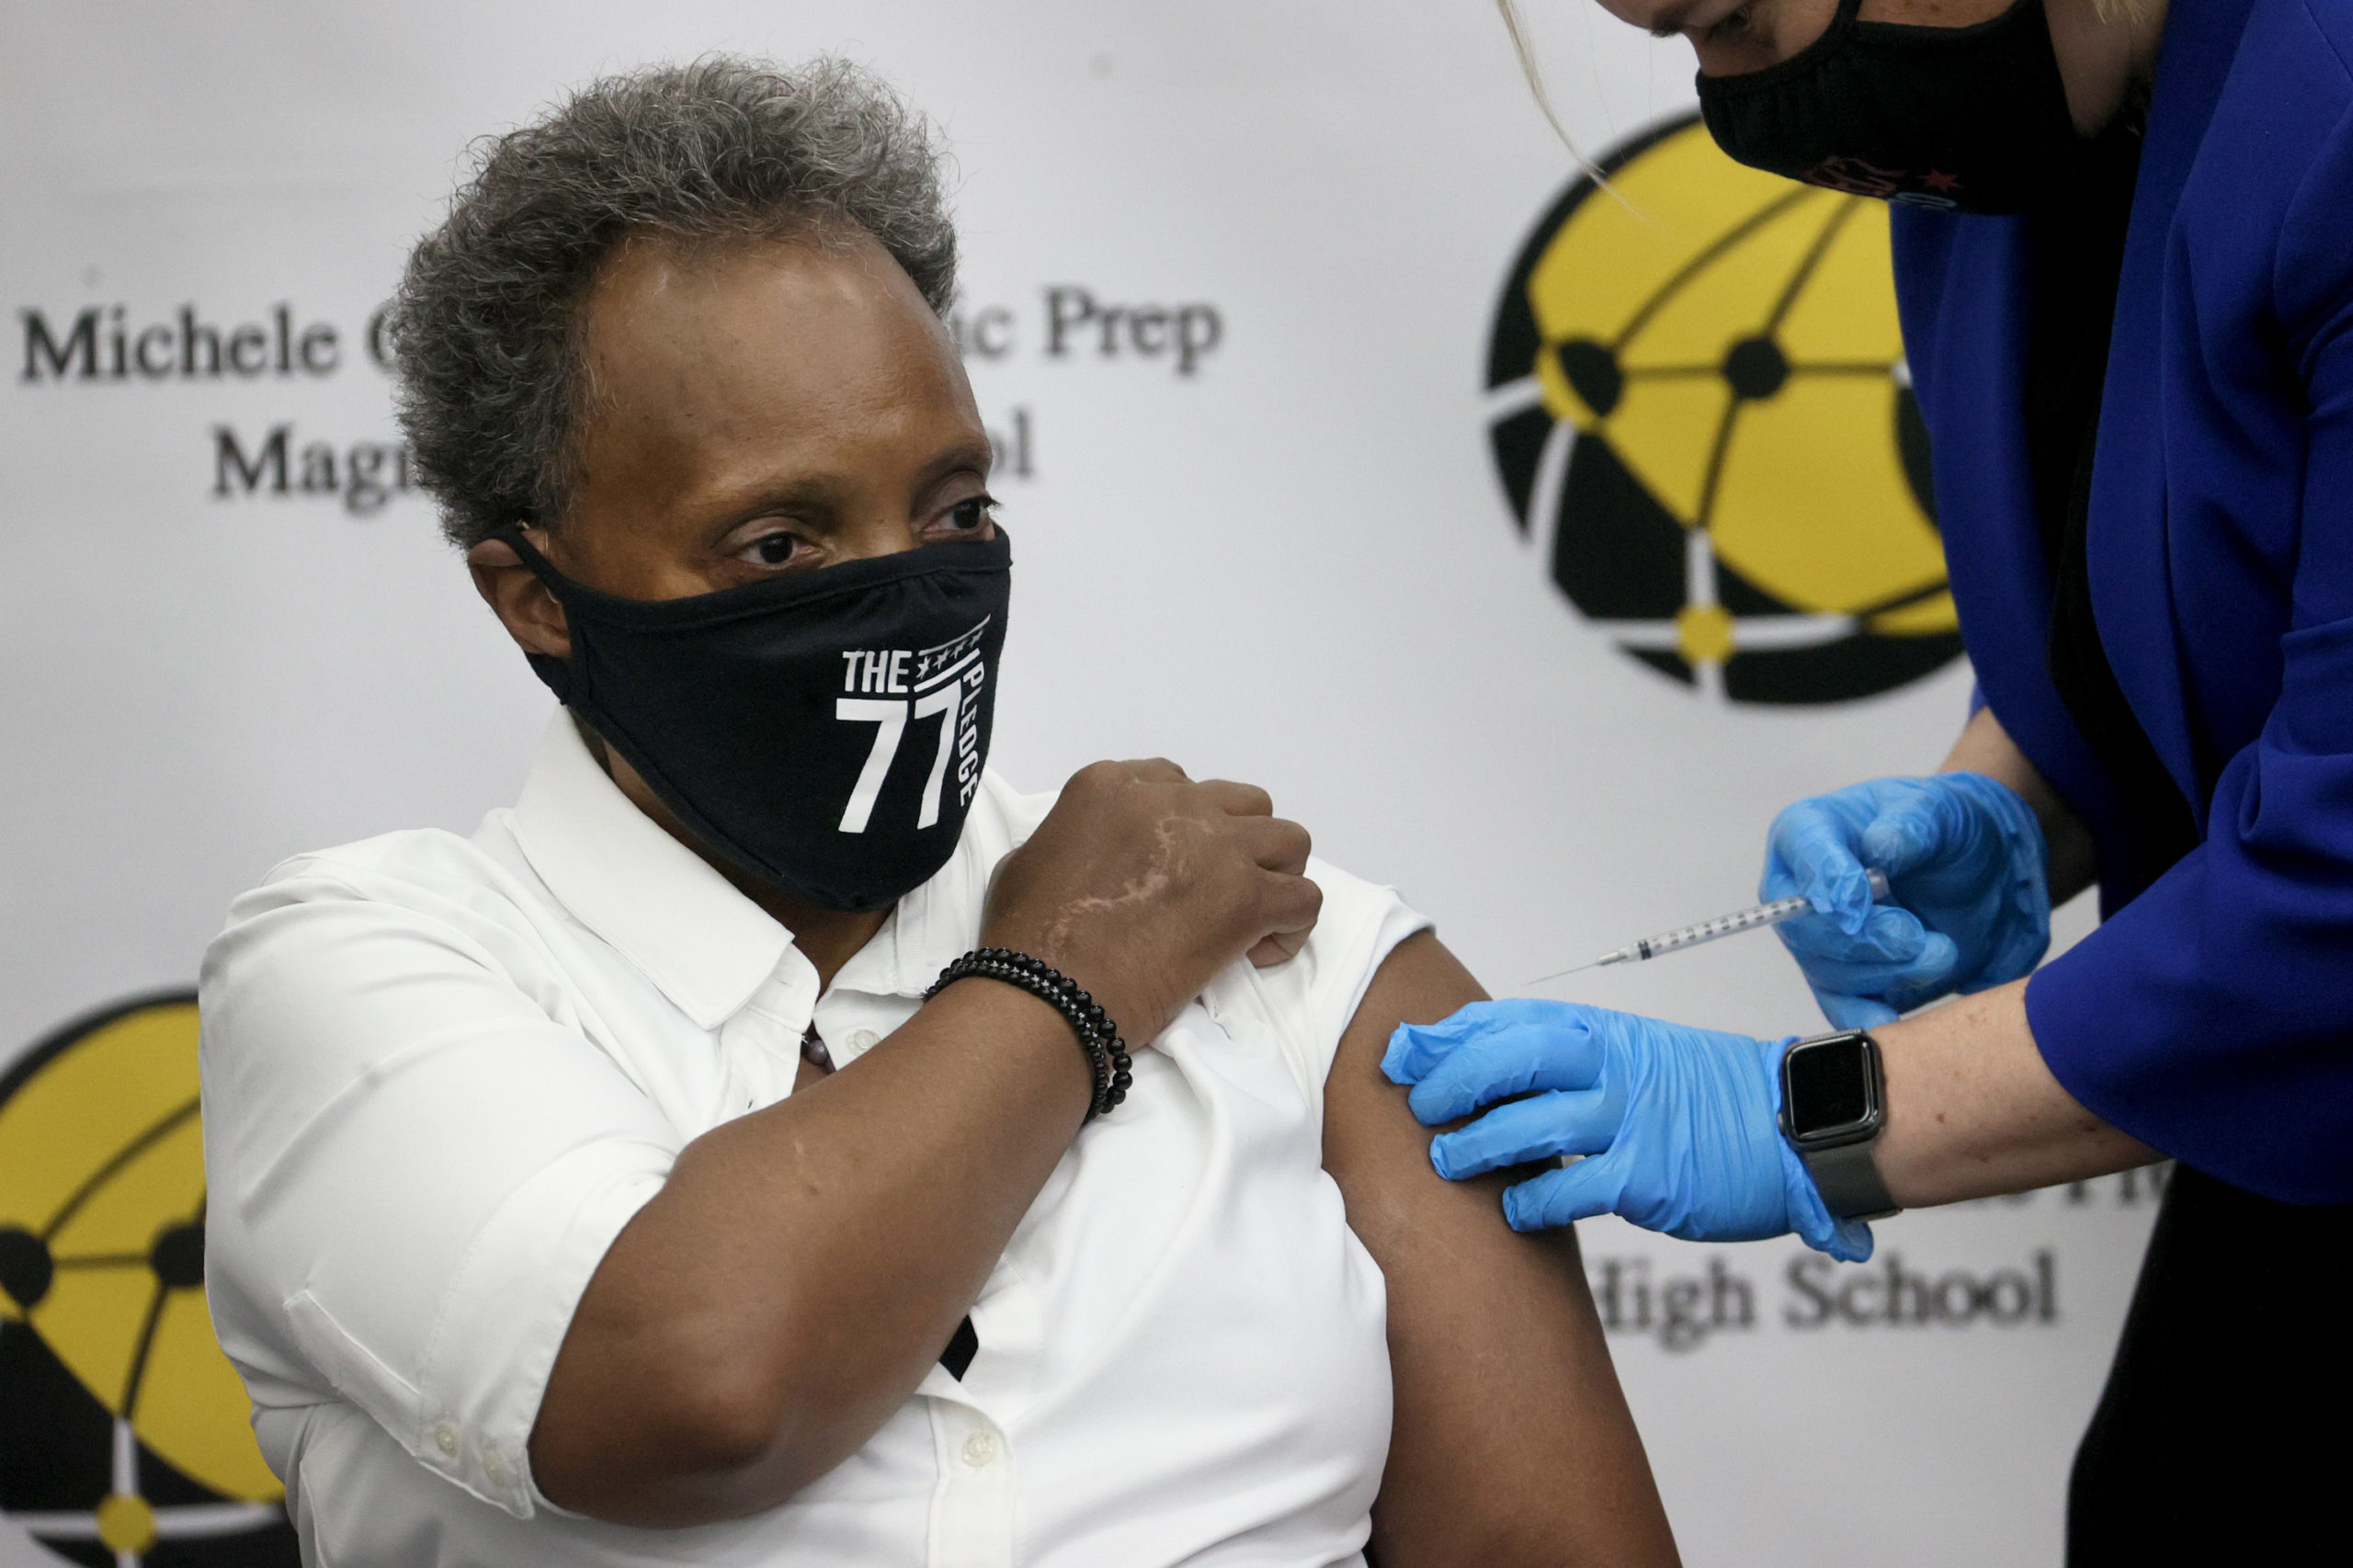 Chicago Mayor Lori Lightfoot gets a COVID-19 booster vaccine at Michele Clark High School on November 12, 2021 in Chicago, Illinois. (Photo by Scott Olson/Getty Images)